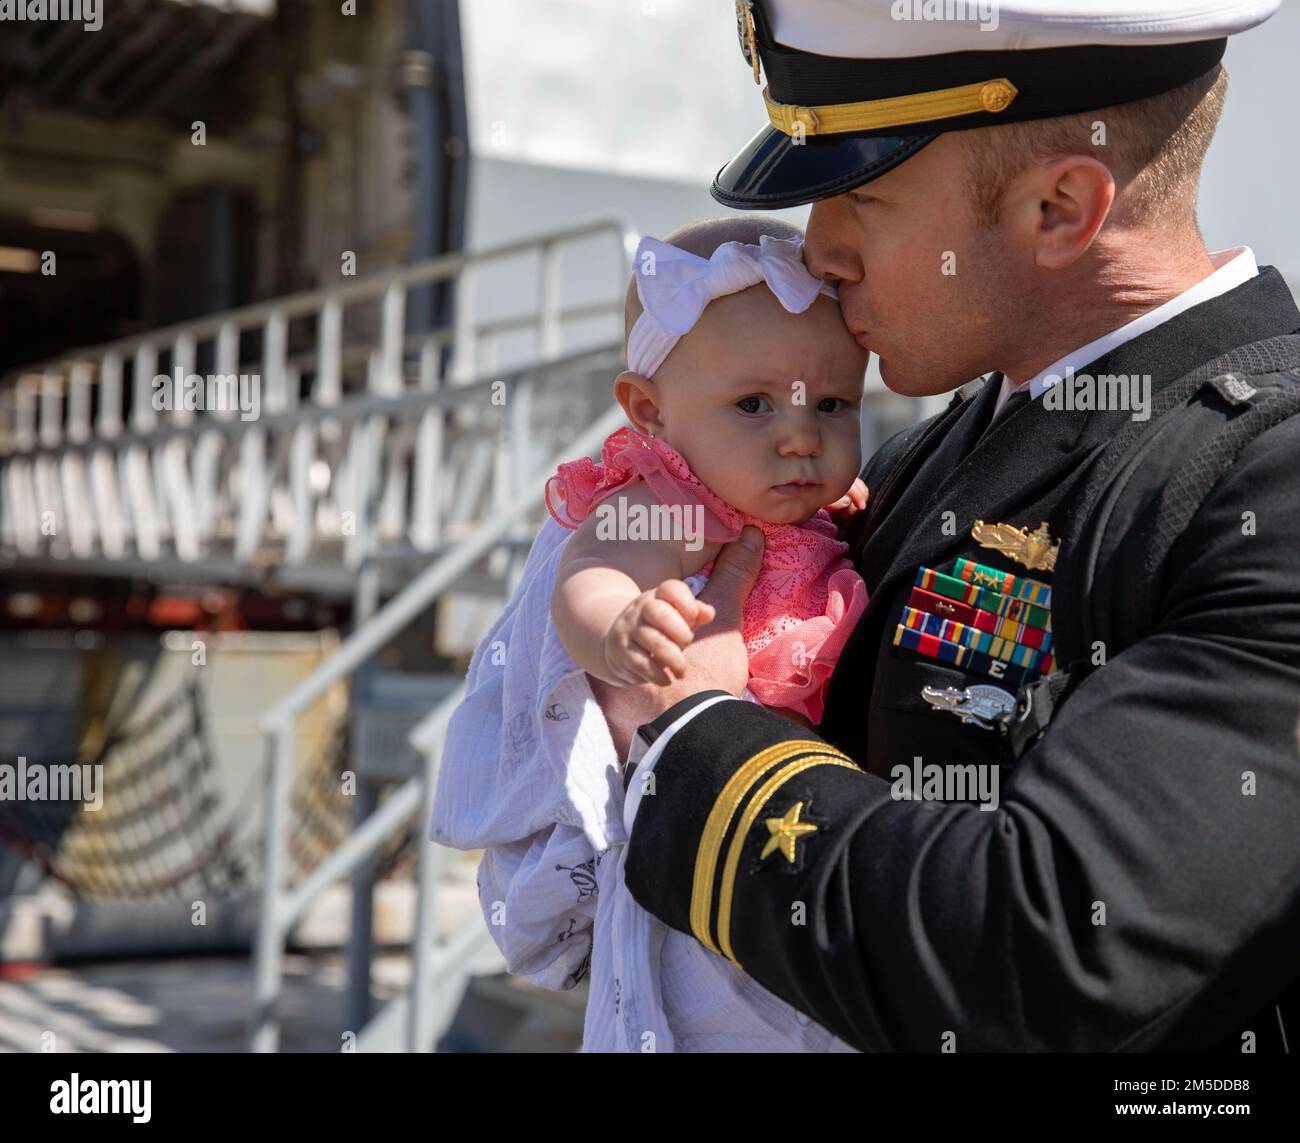 220304-N-LR905-2175  SAN DIEGO (March 4, 2022) – Lt. j.g. Mather, currently assigned to amphibious transport dock ship USS Portland (LPD 27), embraces his child for the first time March 4. Portland, a part of the Essex Amphibious Ready Group, returned to Naval Base San Diego March 4 after a deployment to U.S. 3rd, 5th, and 7th Fleets in support of regional stability and a free and open Indo-Pacific. Stock Photo